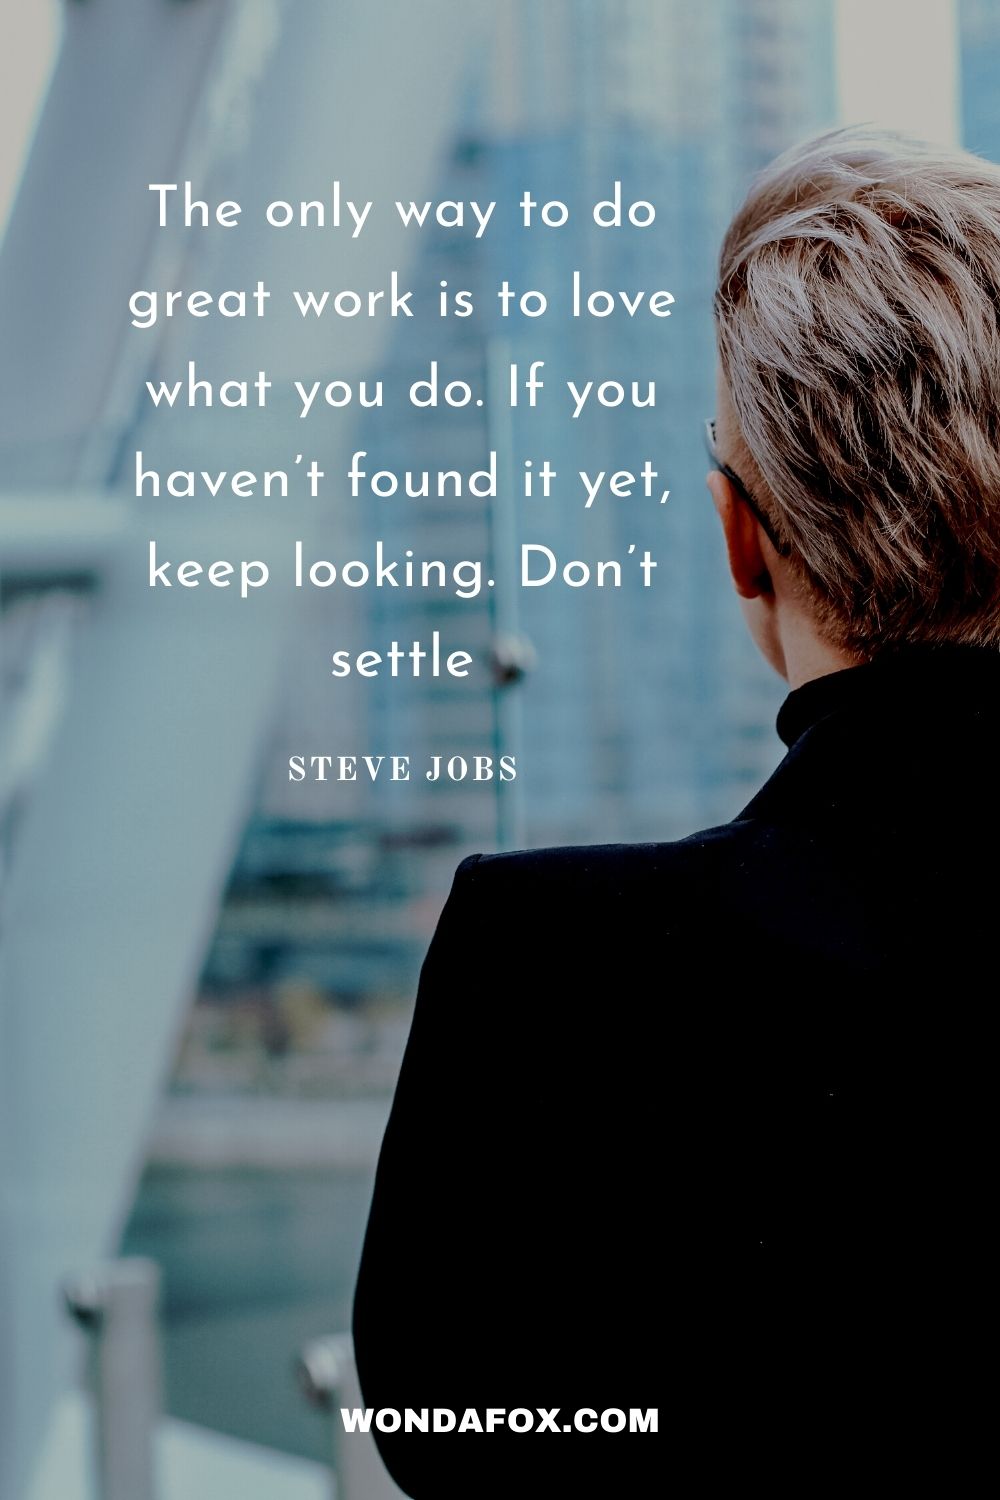 The only way to do great work is to love what you do. If you haven’t found it yet, keep looking. Don’t settle